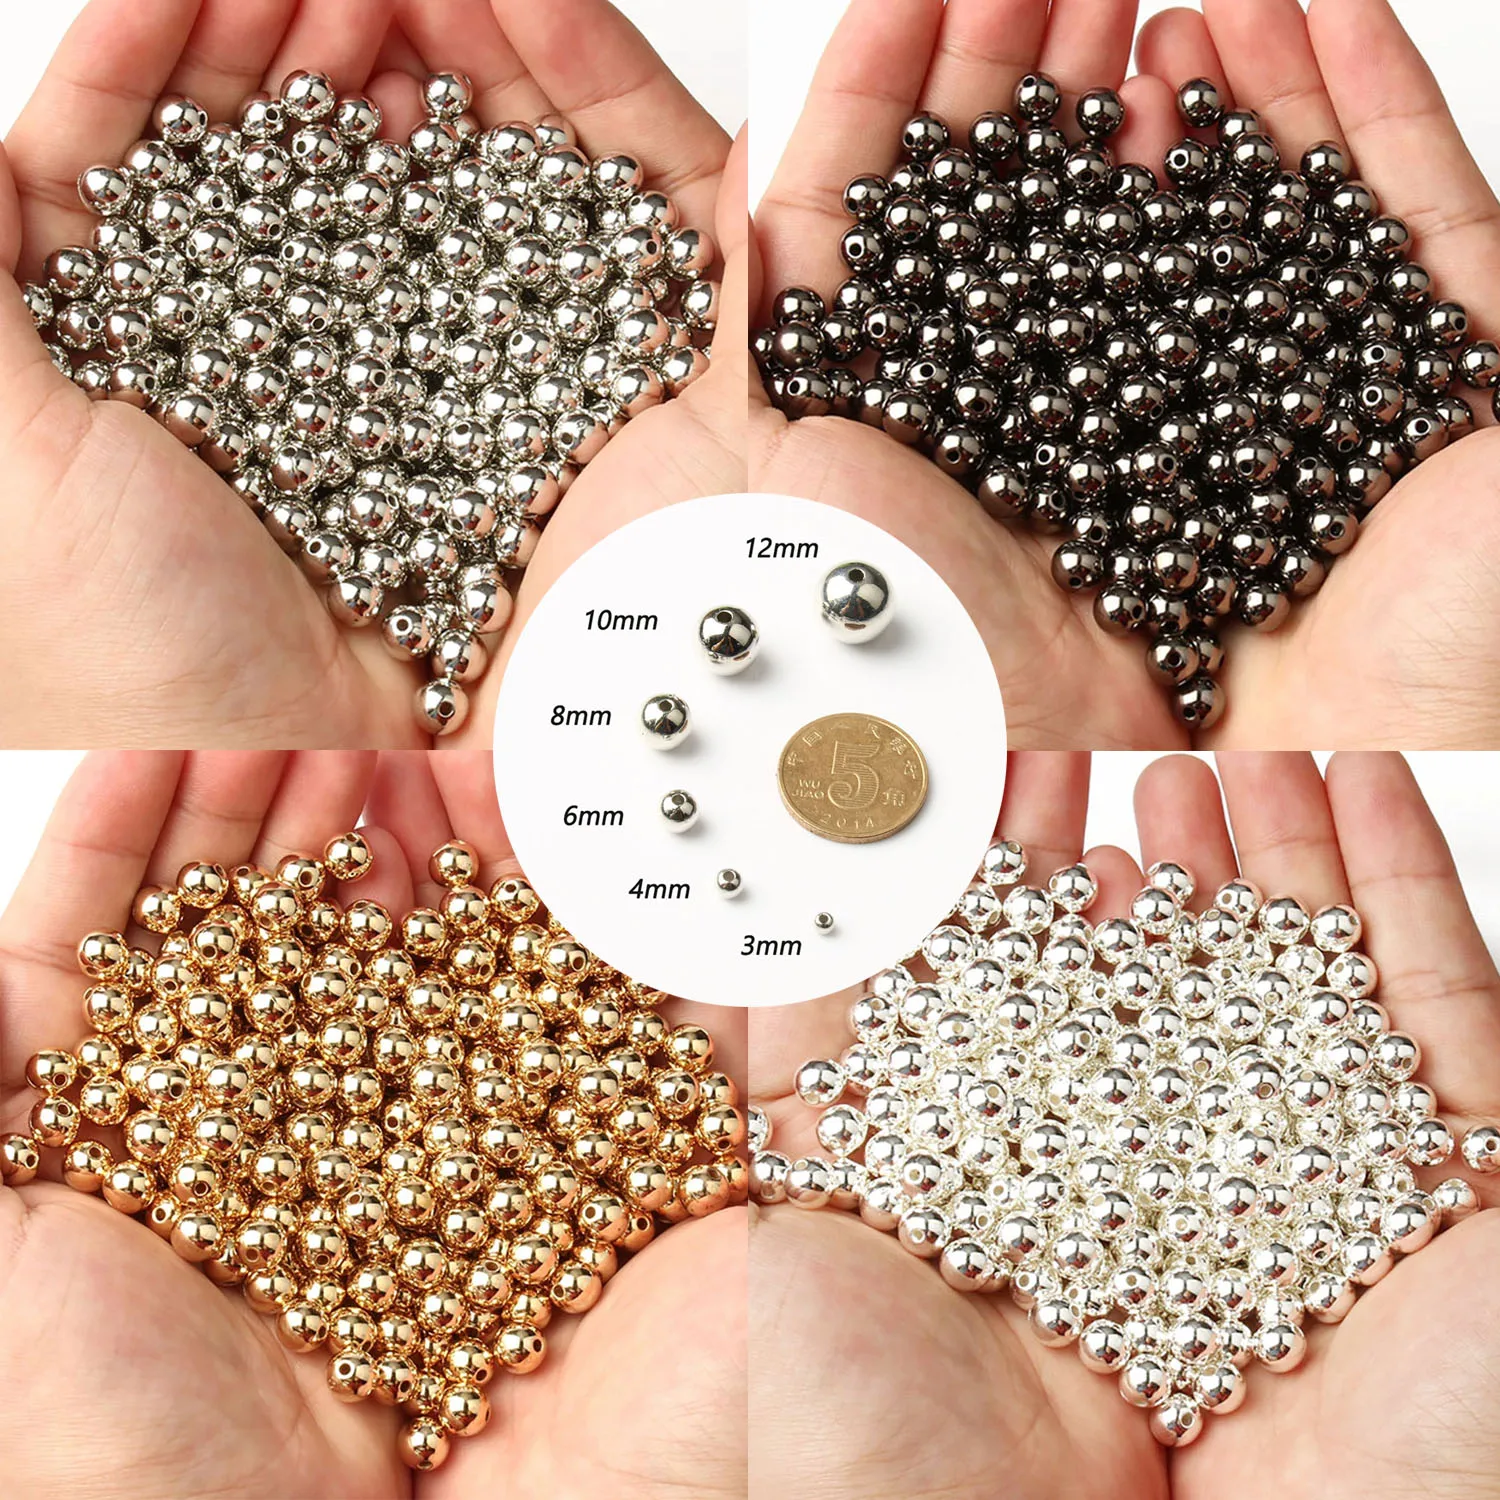 

3 4 5 6 8 10 12mm Black/Gold Metal Plated CCB Acrylic Round Seed Loose Spacer Beads Supplies For DIY Jewelry Making